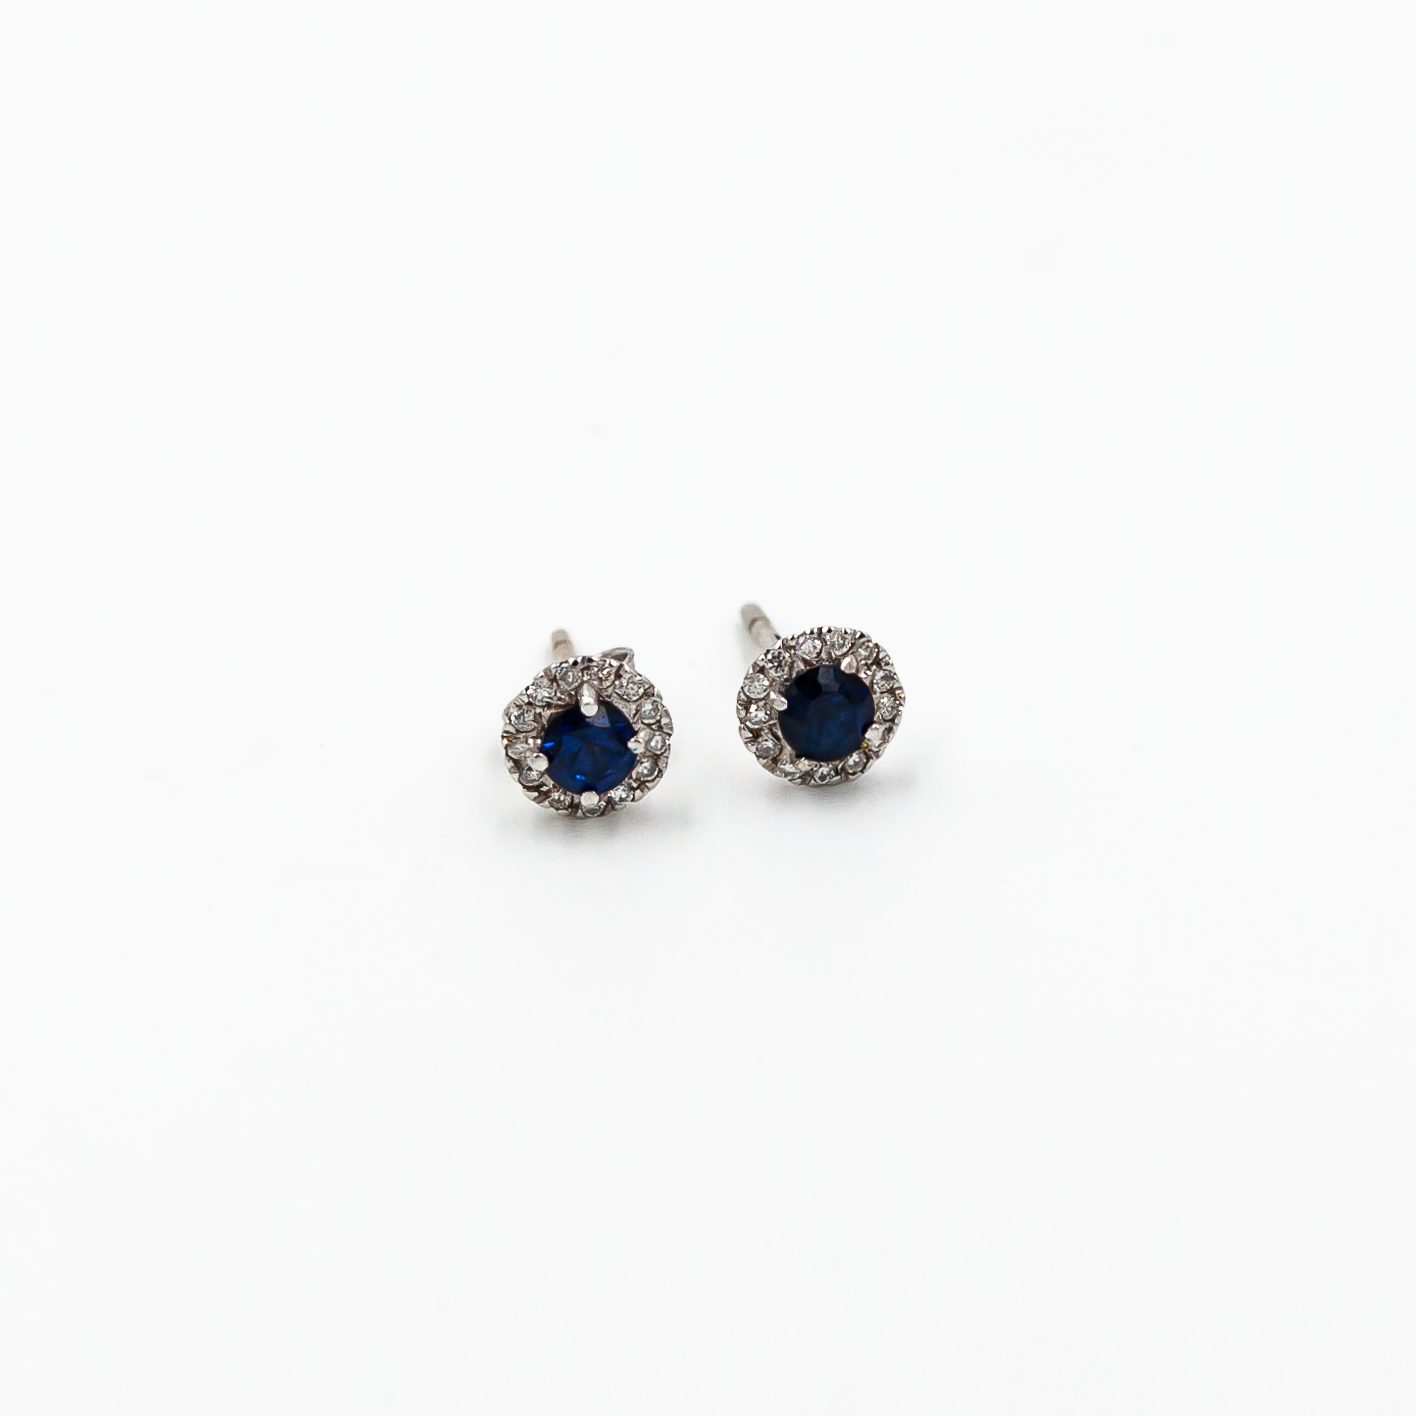 Sapphire Dots earrings with Diamonds and Sapphires